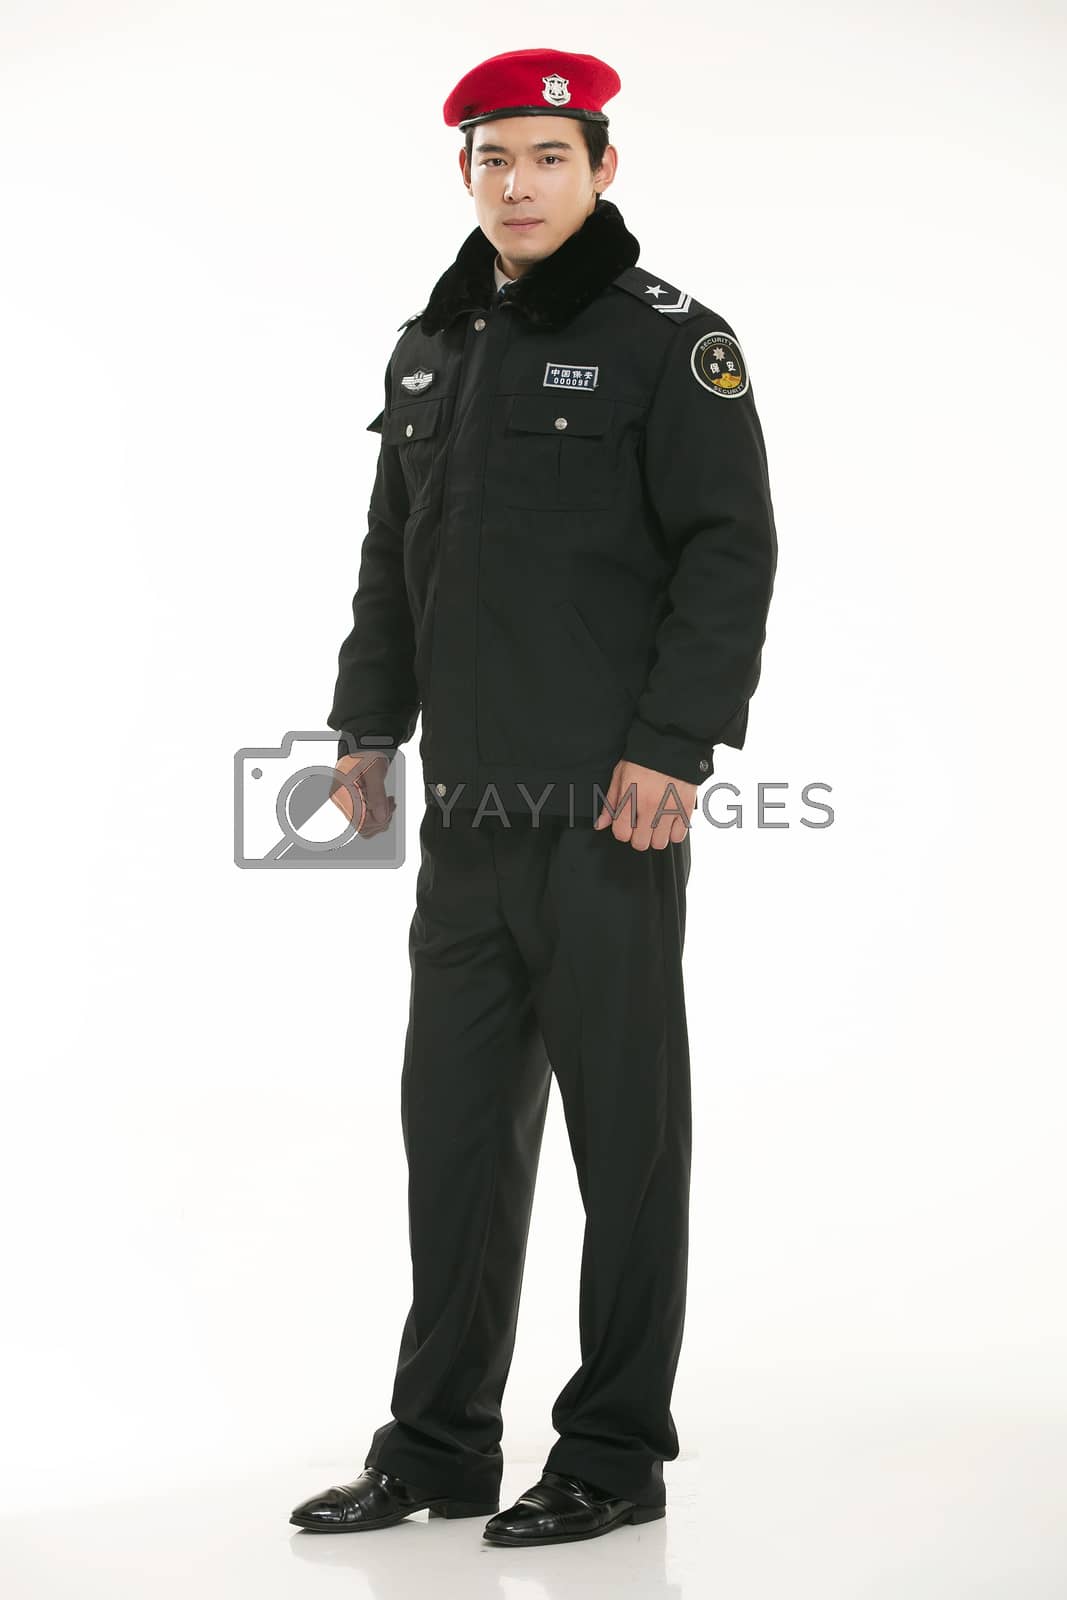 Royalty free image of Create all kinds of work clothes policeman stands in front of a white background by quweichang